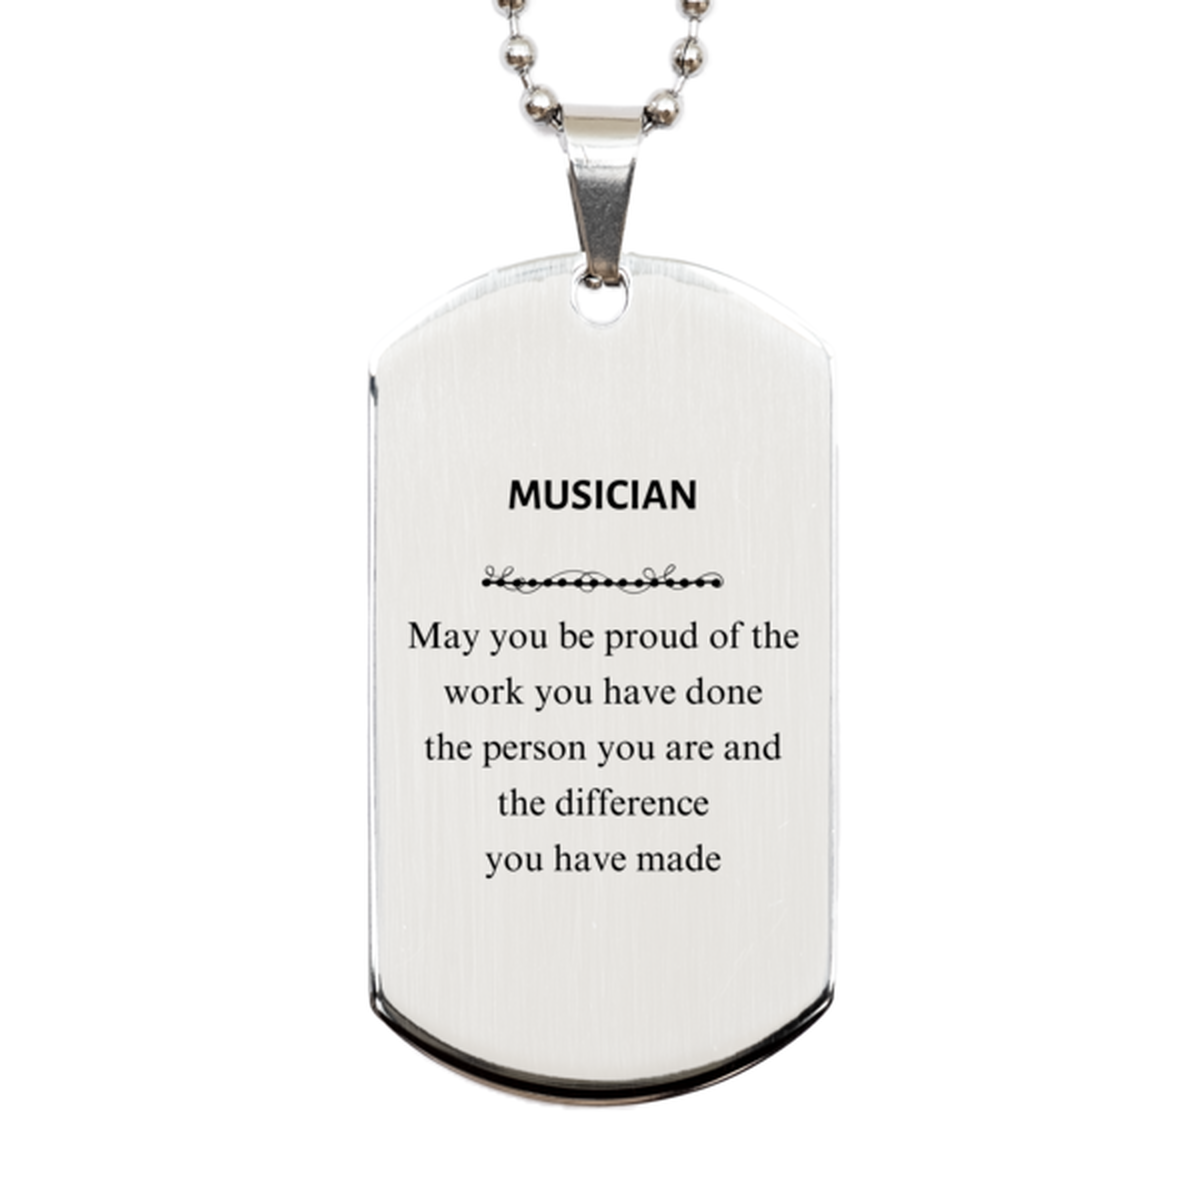 Musician May you be proud of the work you have done, Retirement Musician Silver Dog Tag for Colleague Appreciation Gifts Amazing for Musician